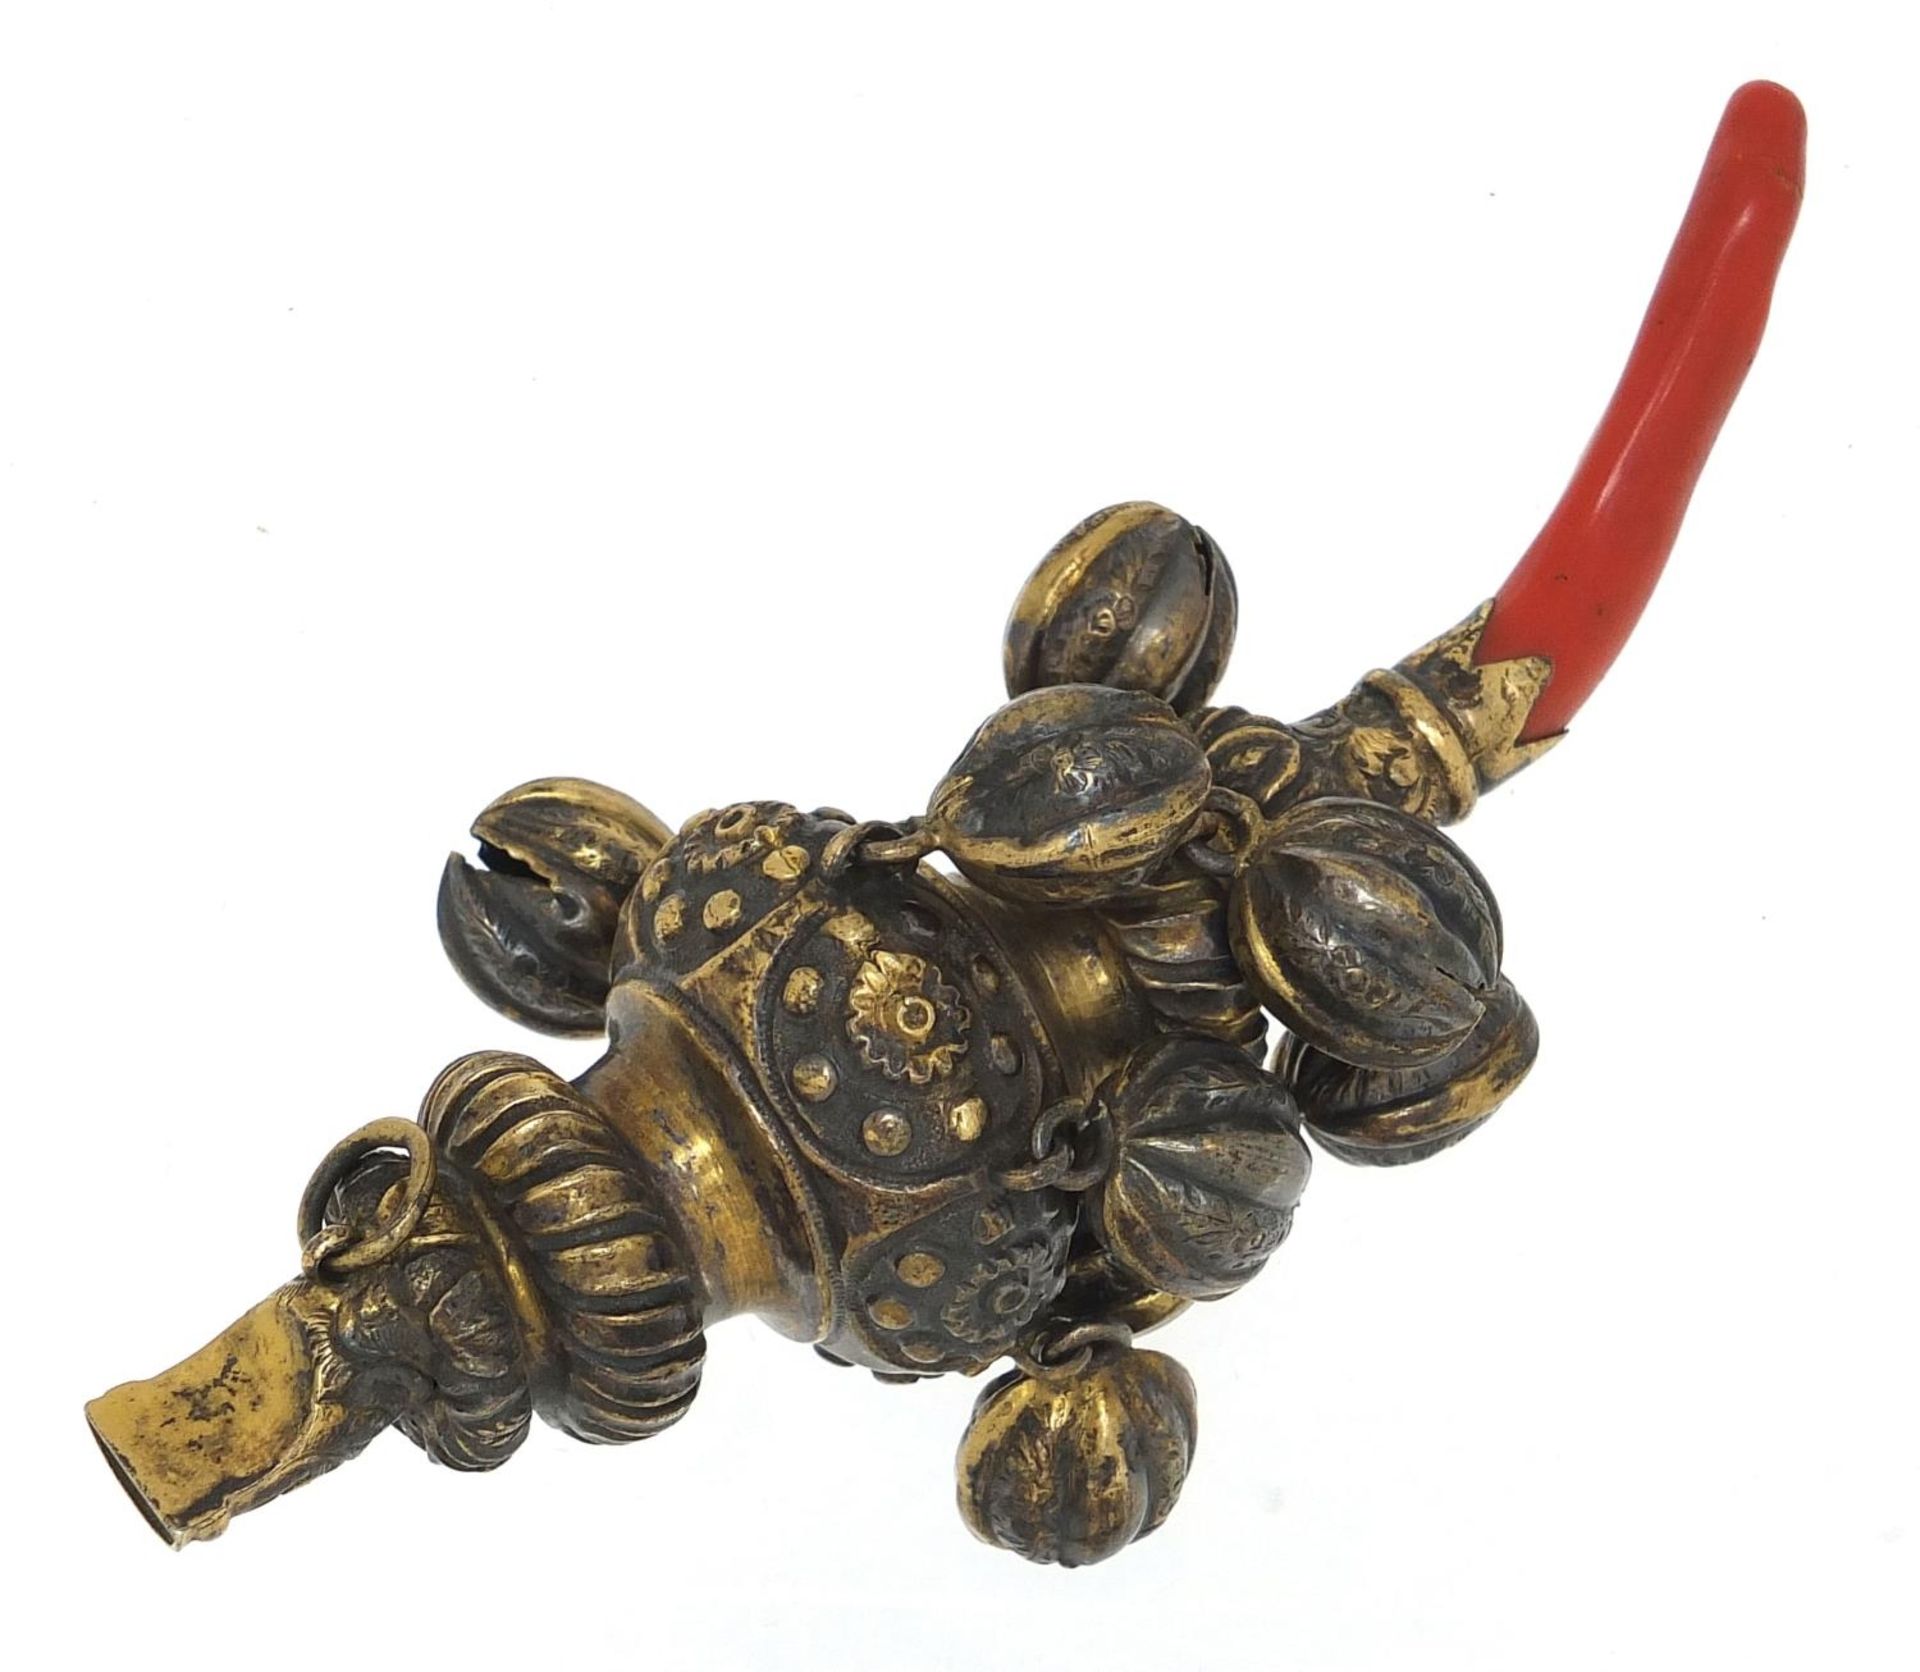 Victorian silver gilt babies' rattle whistle with coral teether, Sheffield 1865, 12.5cm in length, - Image 2 of 3